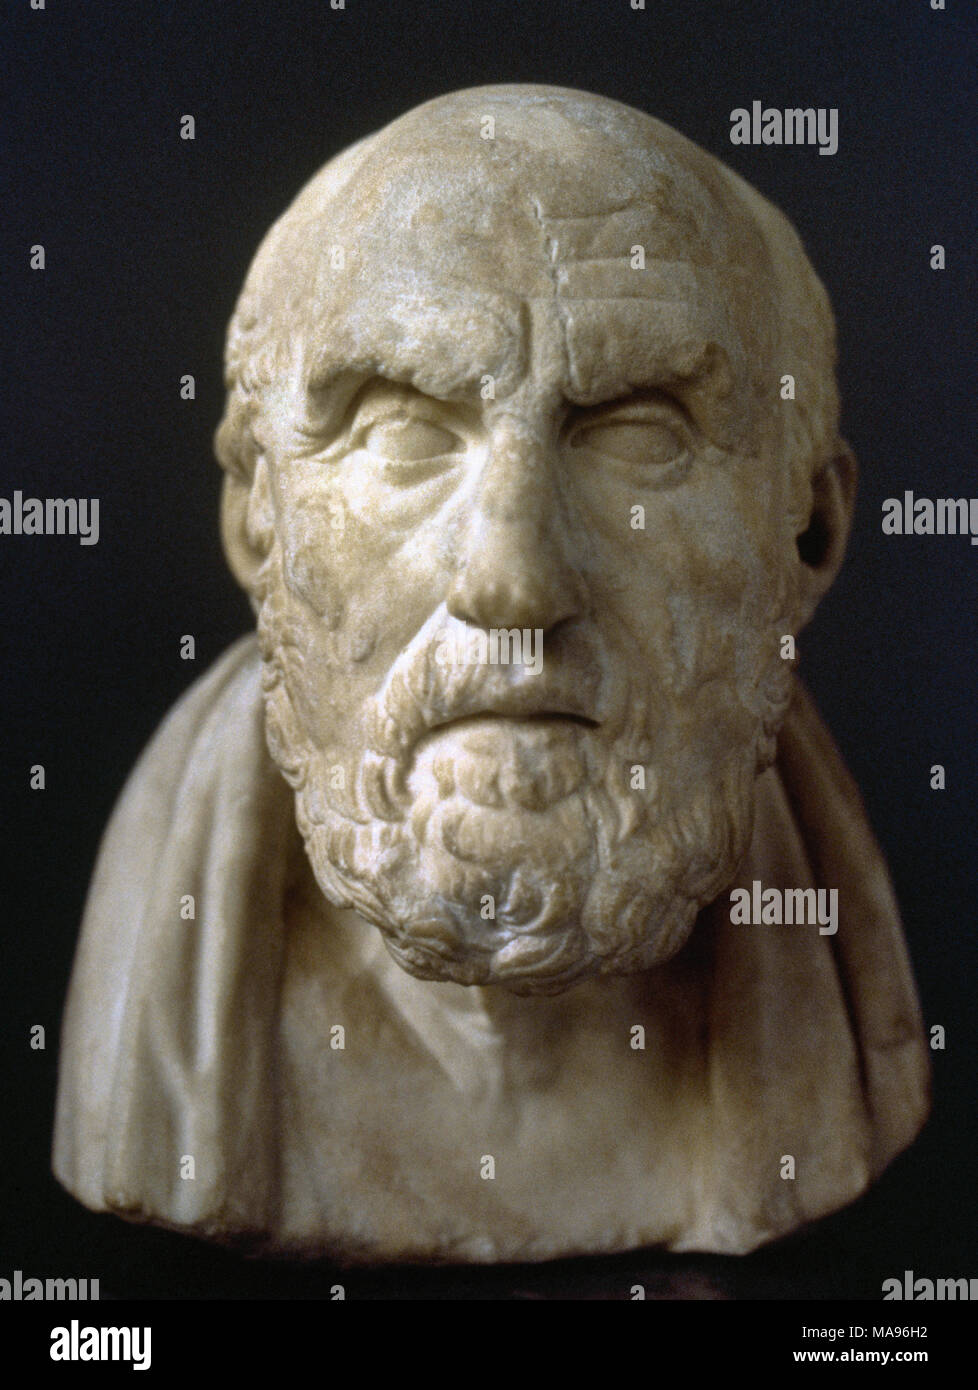 Chrysippus (280-206 BC). Greek Stoic philosopher. Stoicism school. Bust. Roman copy from a Hellenistic bust. British Museum. London, England. Stock Photo